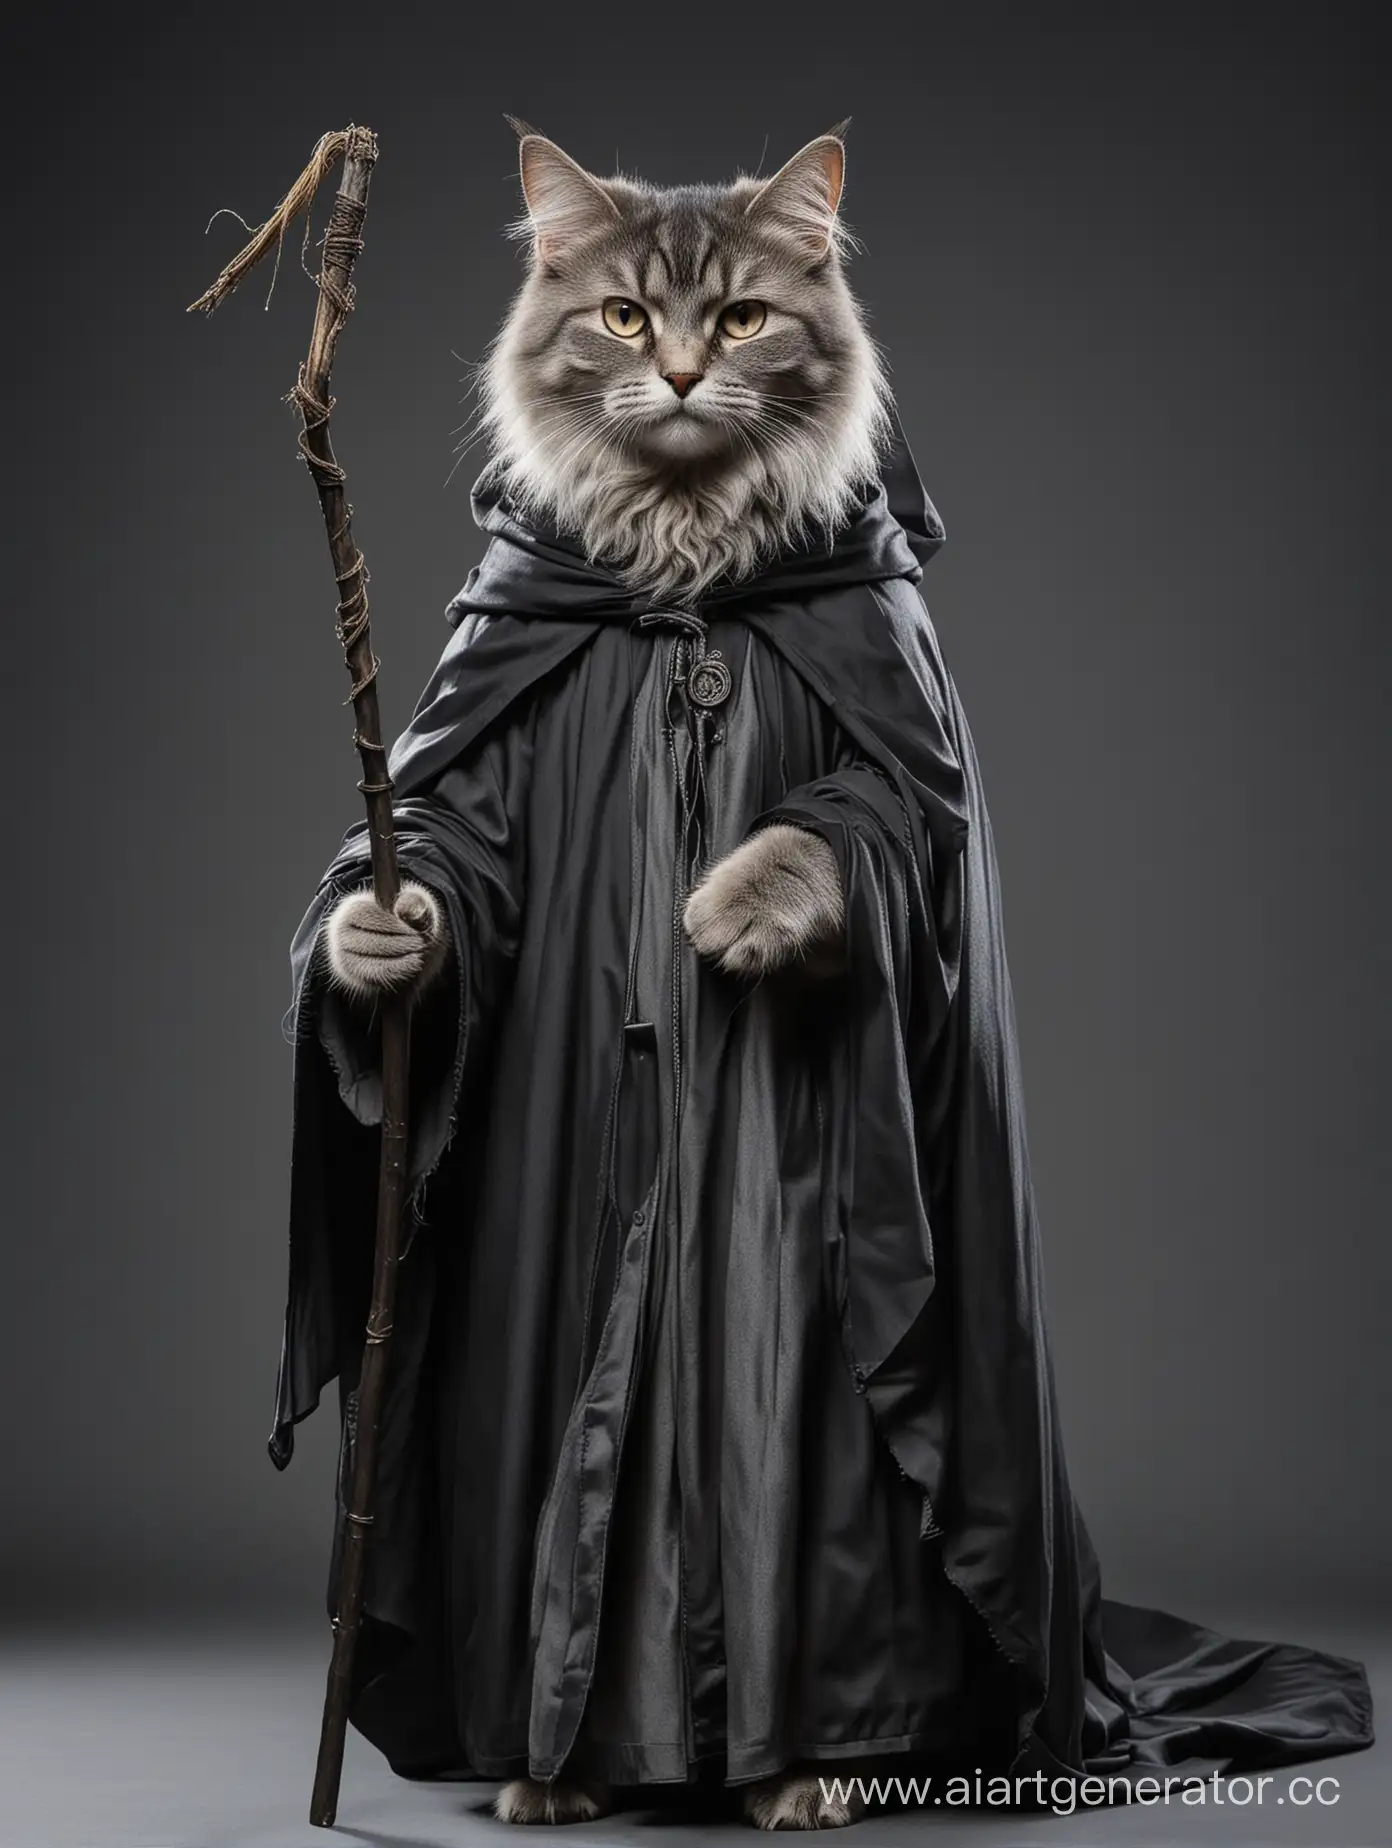 Grey-Furred-Wizard-Cat-in-Mages-Cloak-Wielding-a-Long-Staff